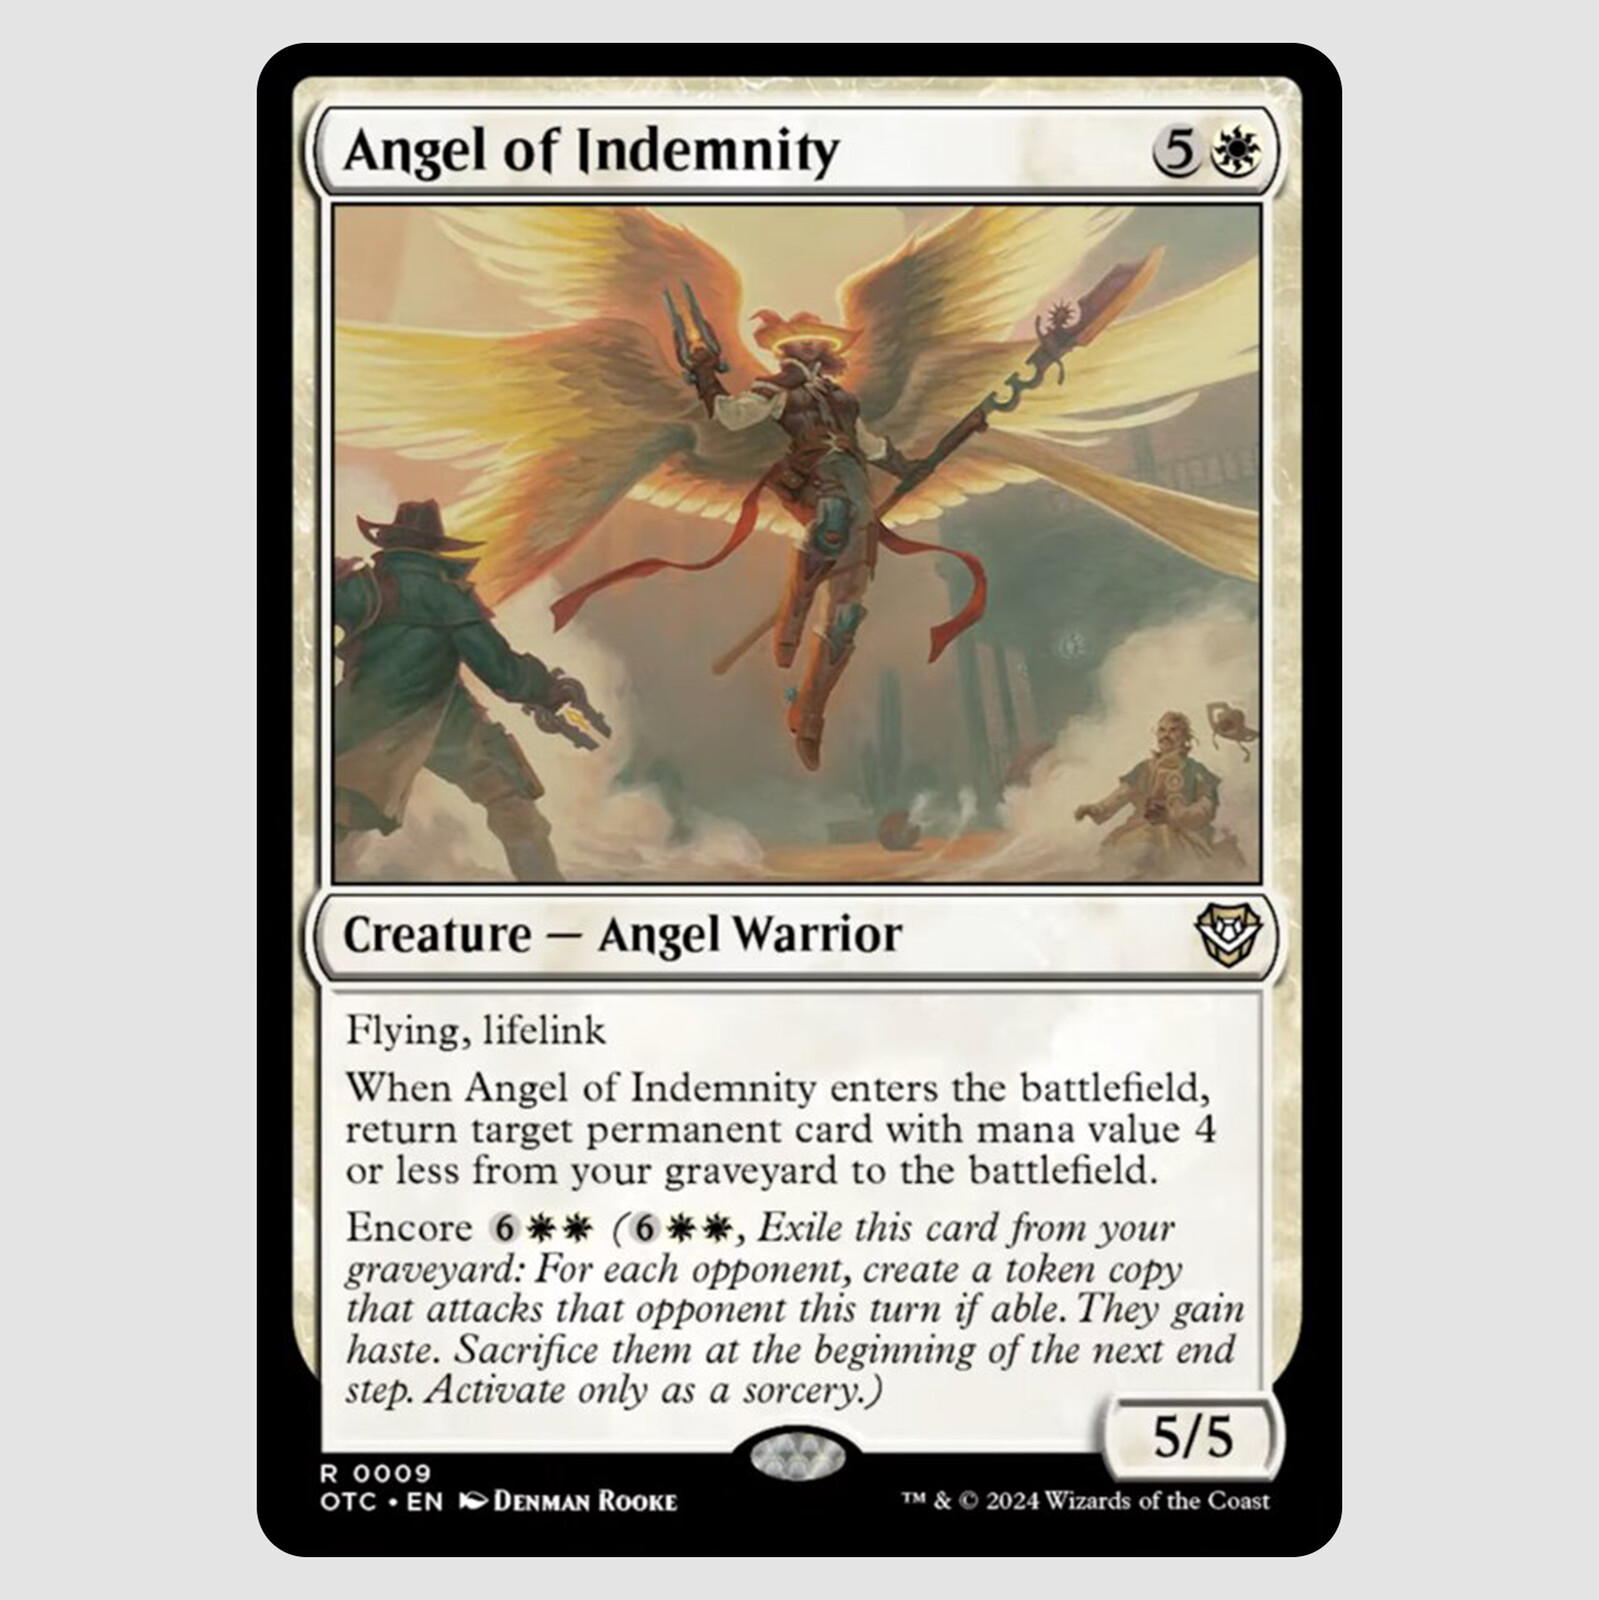 Angel of Indemnity card